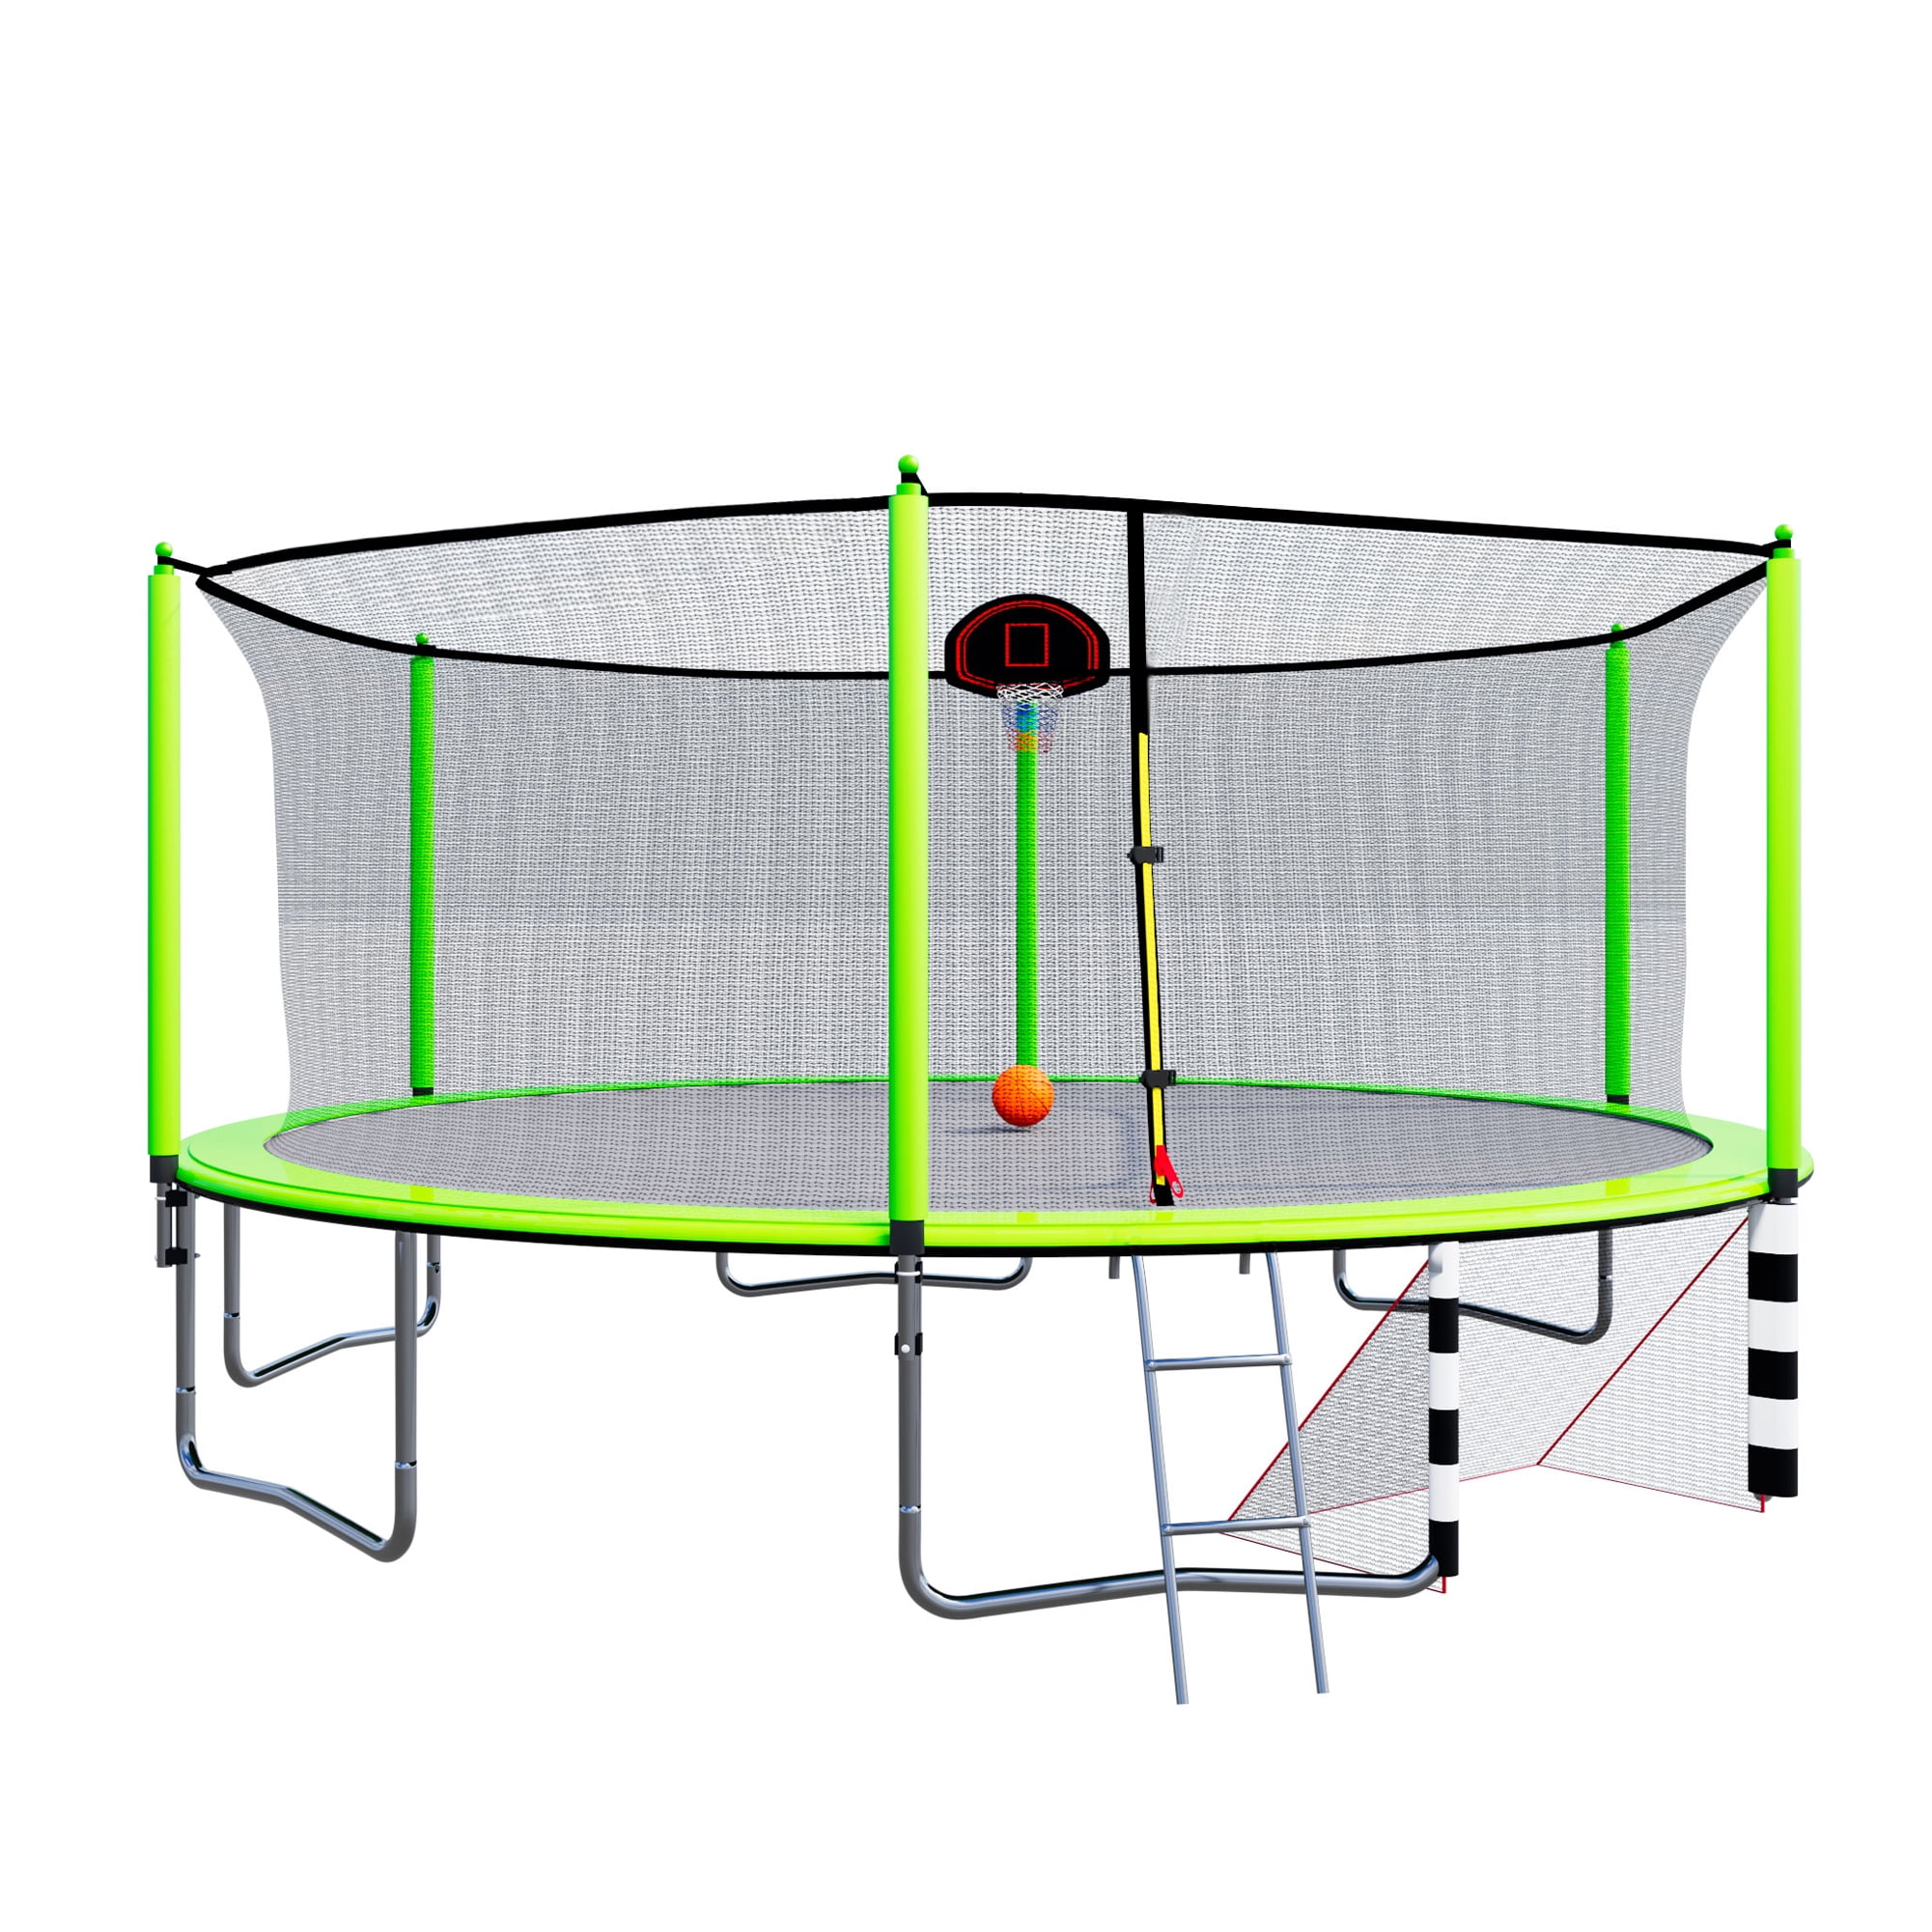 SkyBound 16ft Recreation Trampoline with Enclosure Outdoor Trampoline for Kids Adults ASTM Approved,Green - Walmart.com